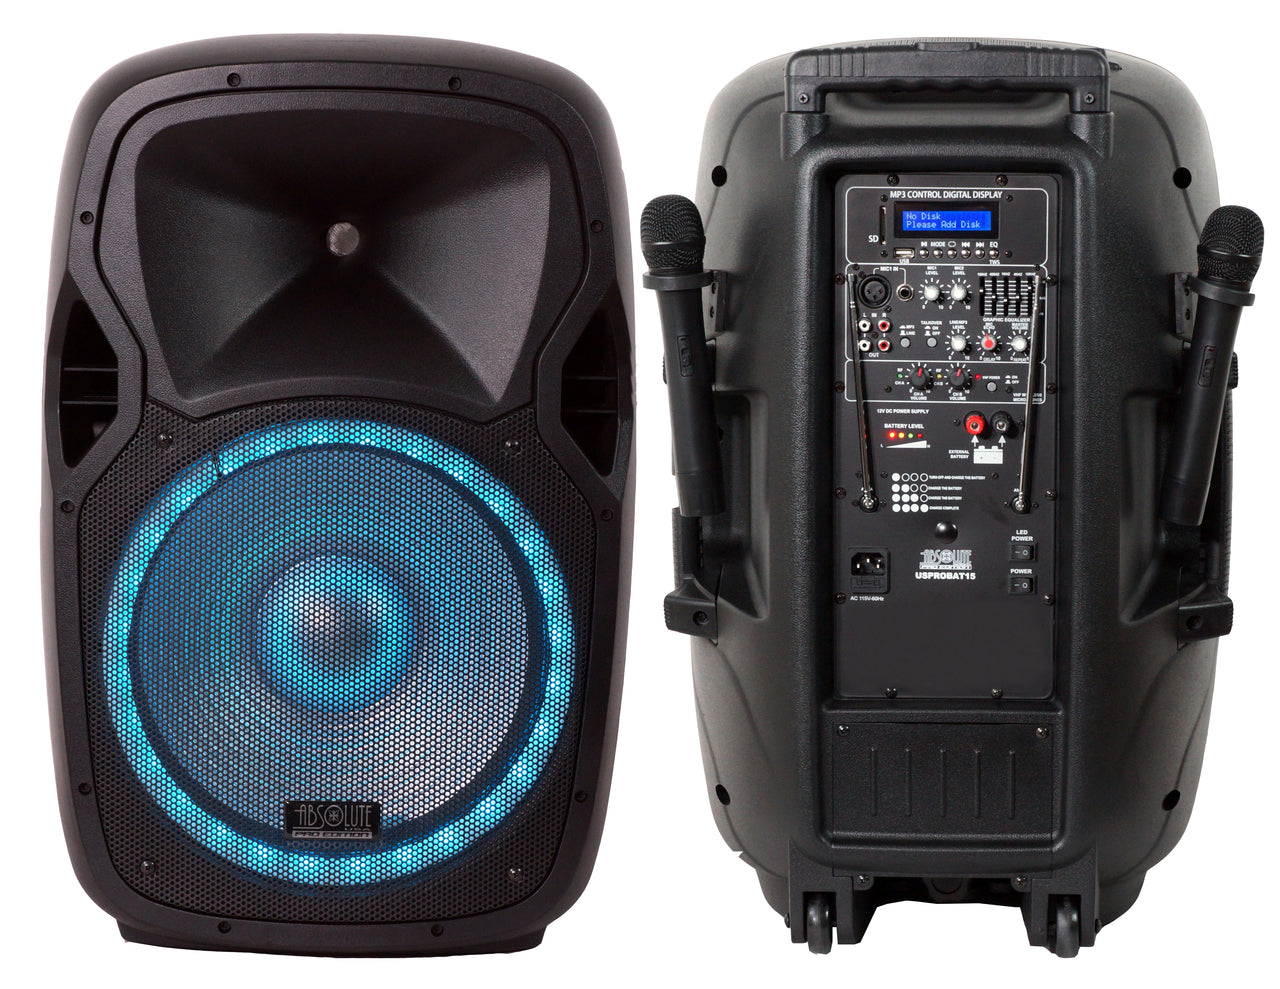 Absolute USA USPROBAT15 15" Portable Bluetooth PA Speaker System 3500W Rechargeable Outdoor Bluetooth Speaker Portable PA System w/ 2 Wireless Microphone, MP3 USB SD Card Reader, FM Radio, Rolling Wheels, Remote